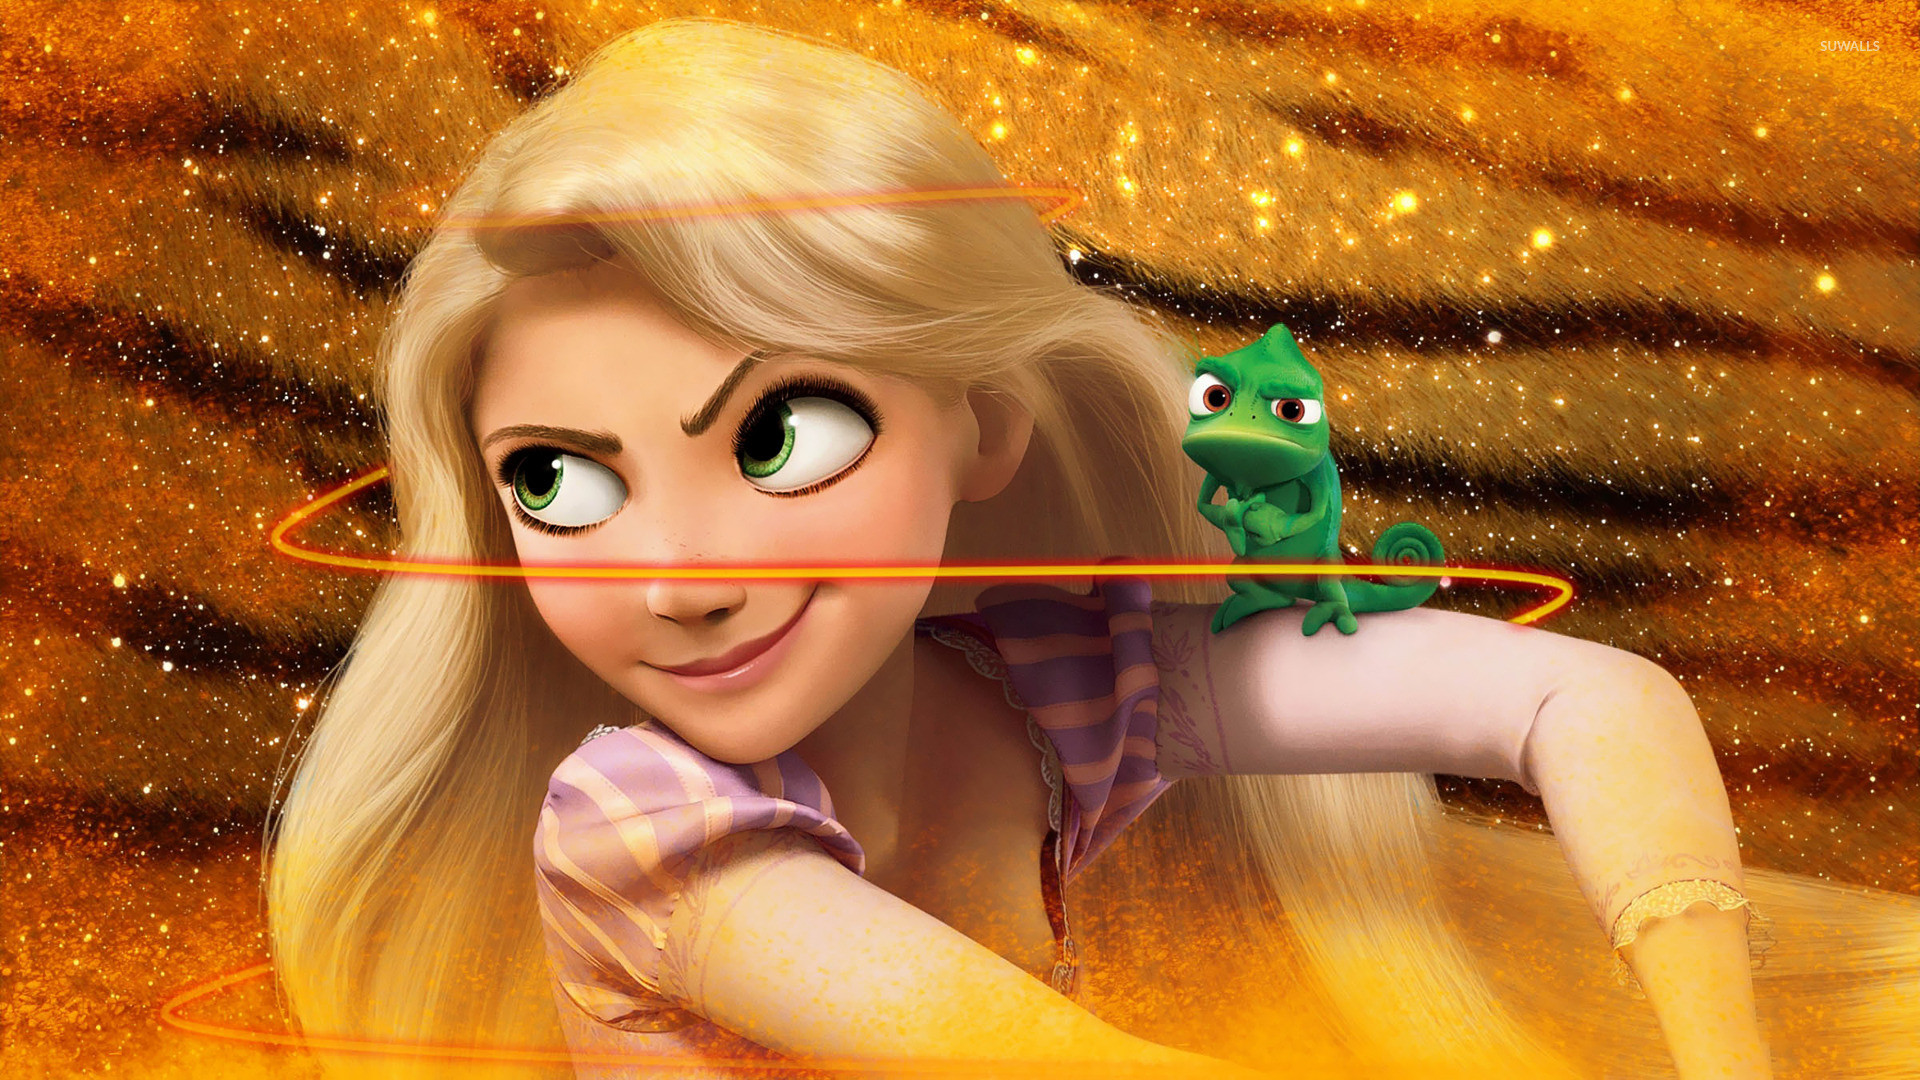 1920x1080 Rapunzel and Pascal - Tangled wallpaper